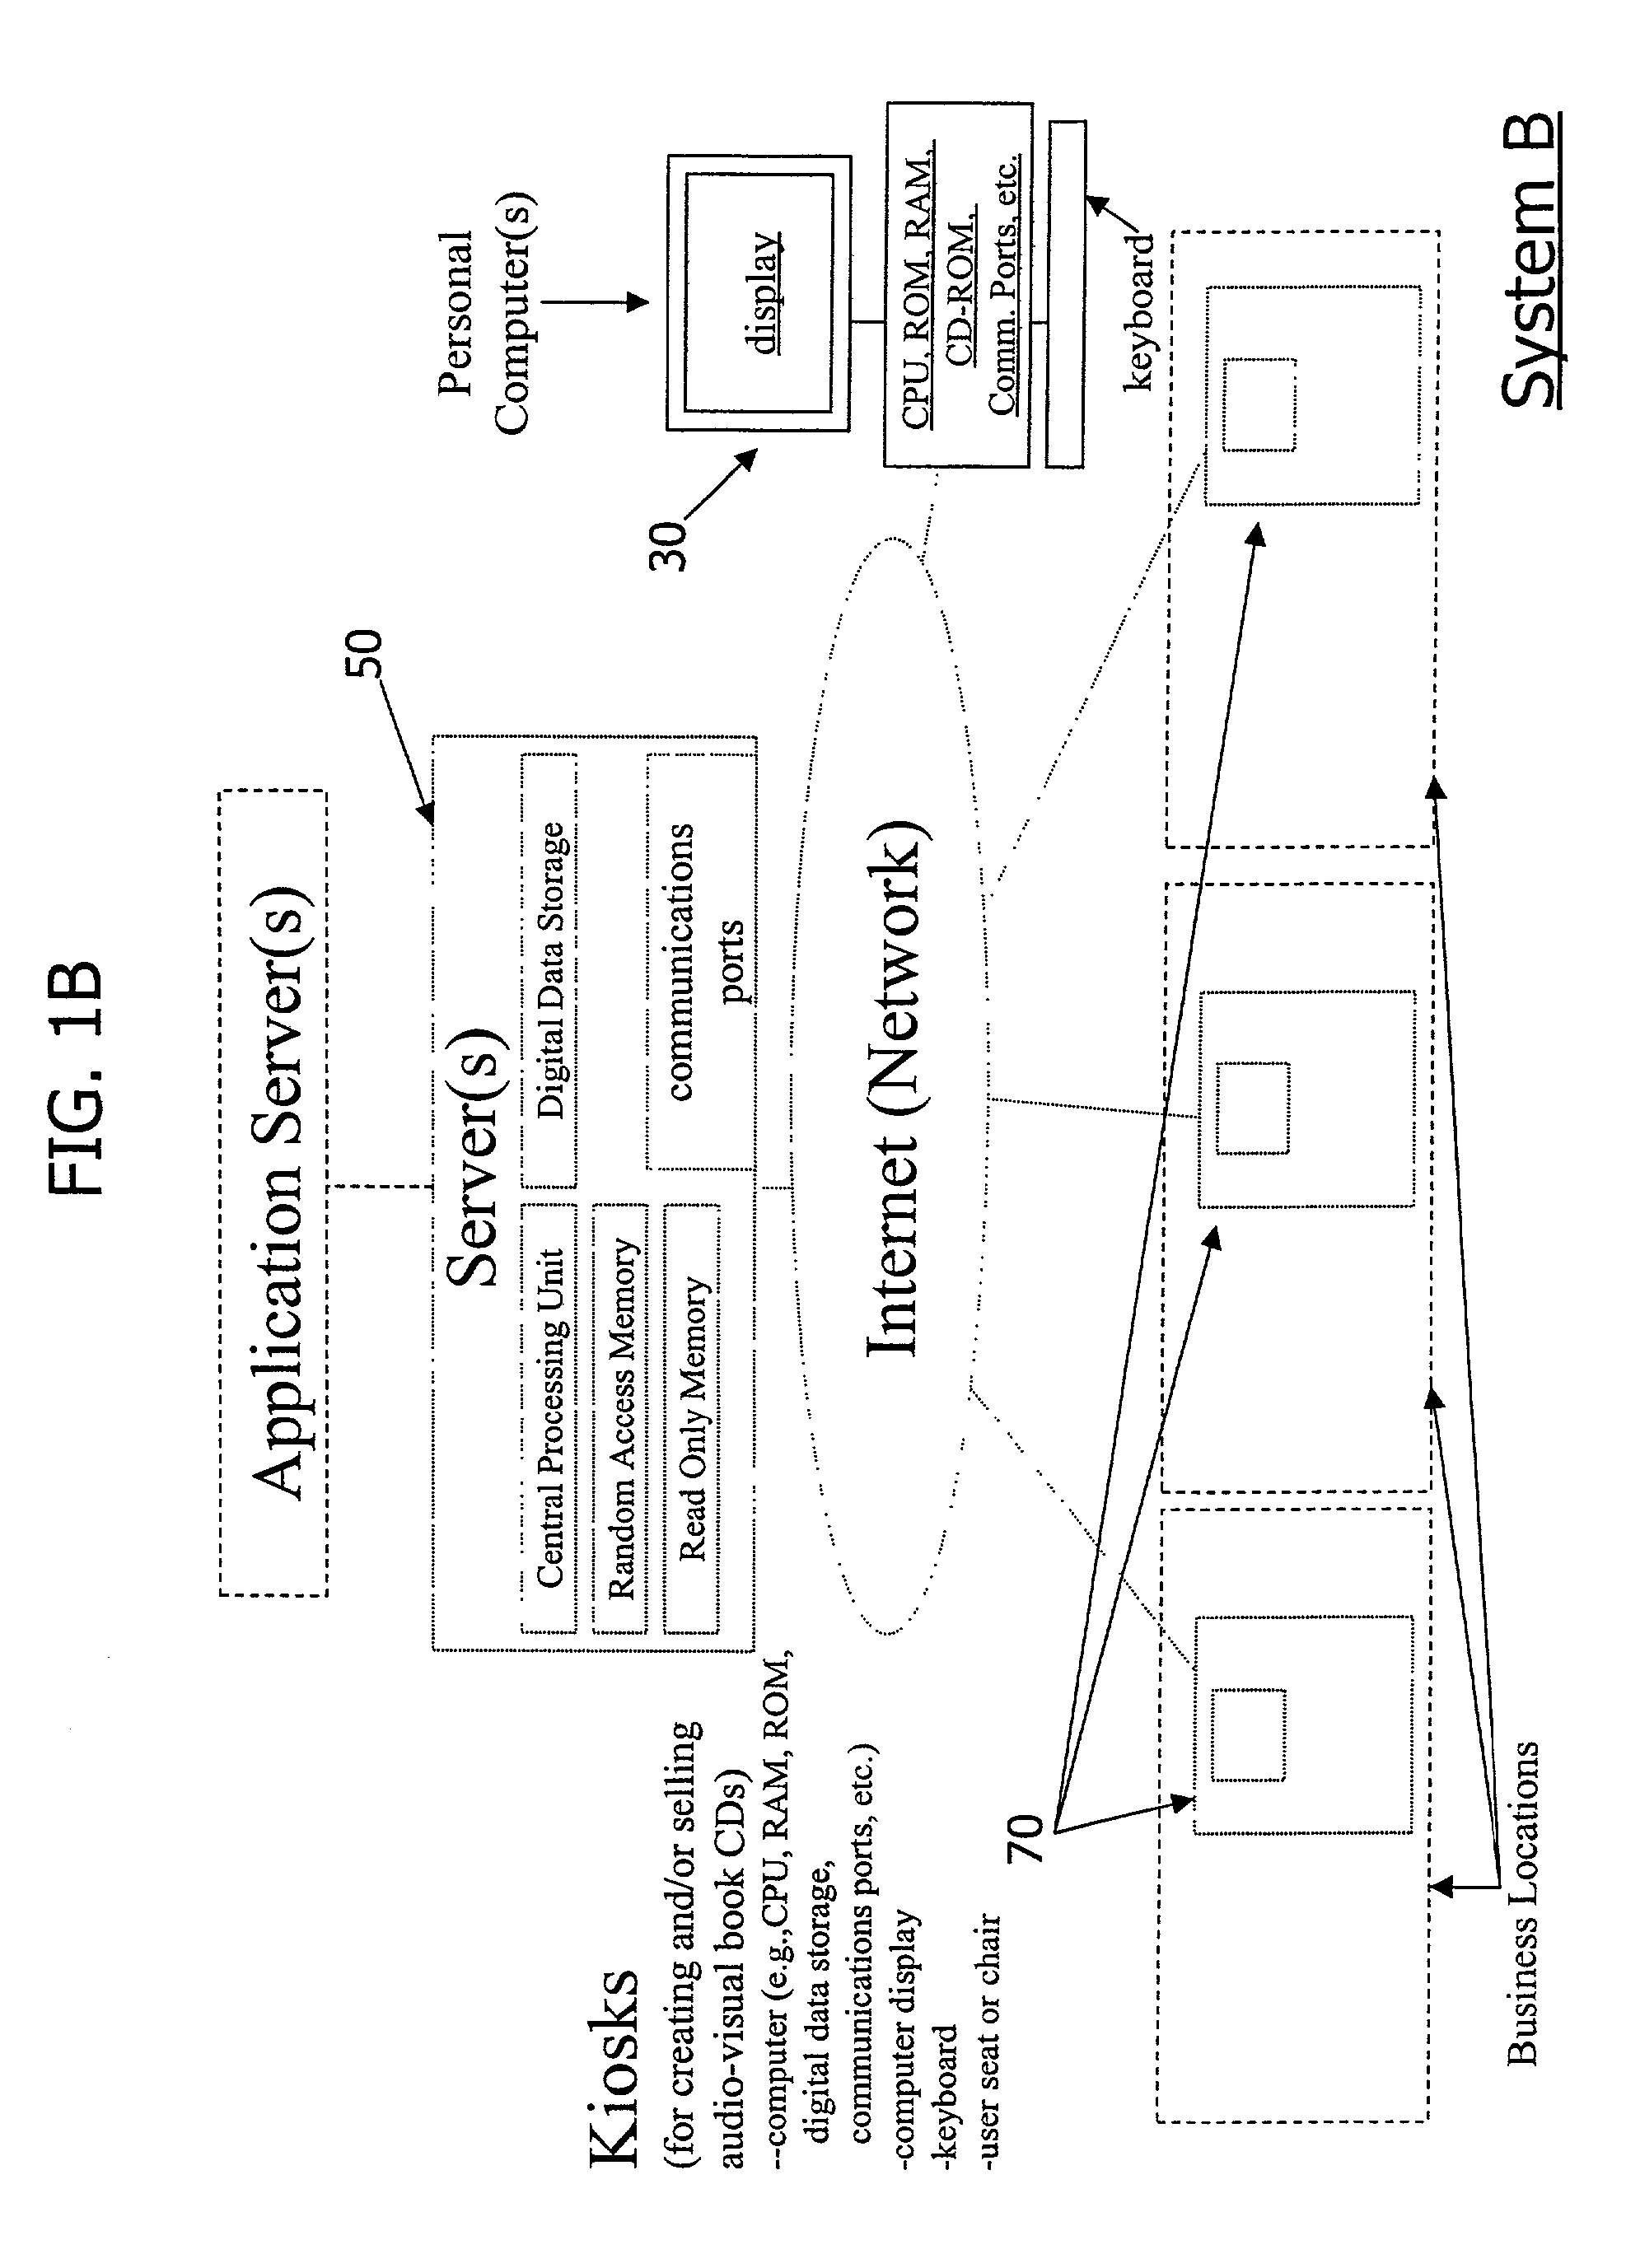 System and method for the delivery of electronic books